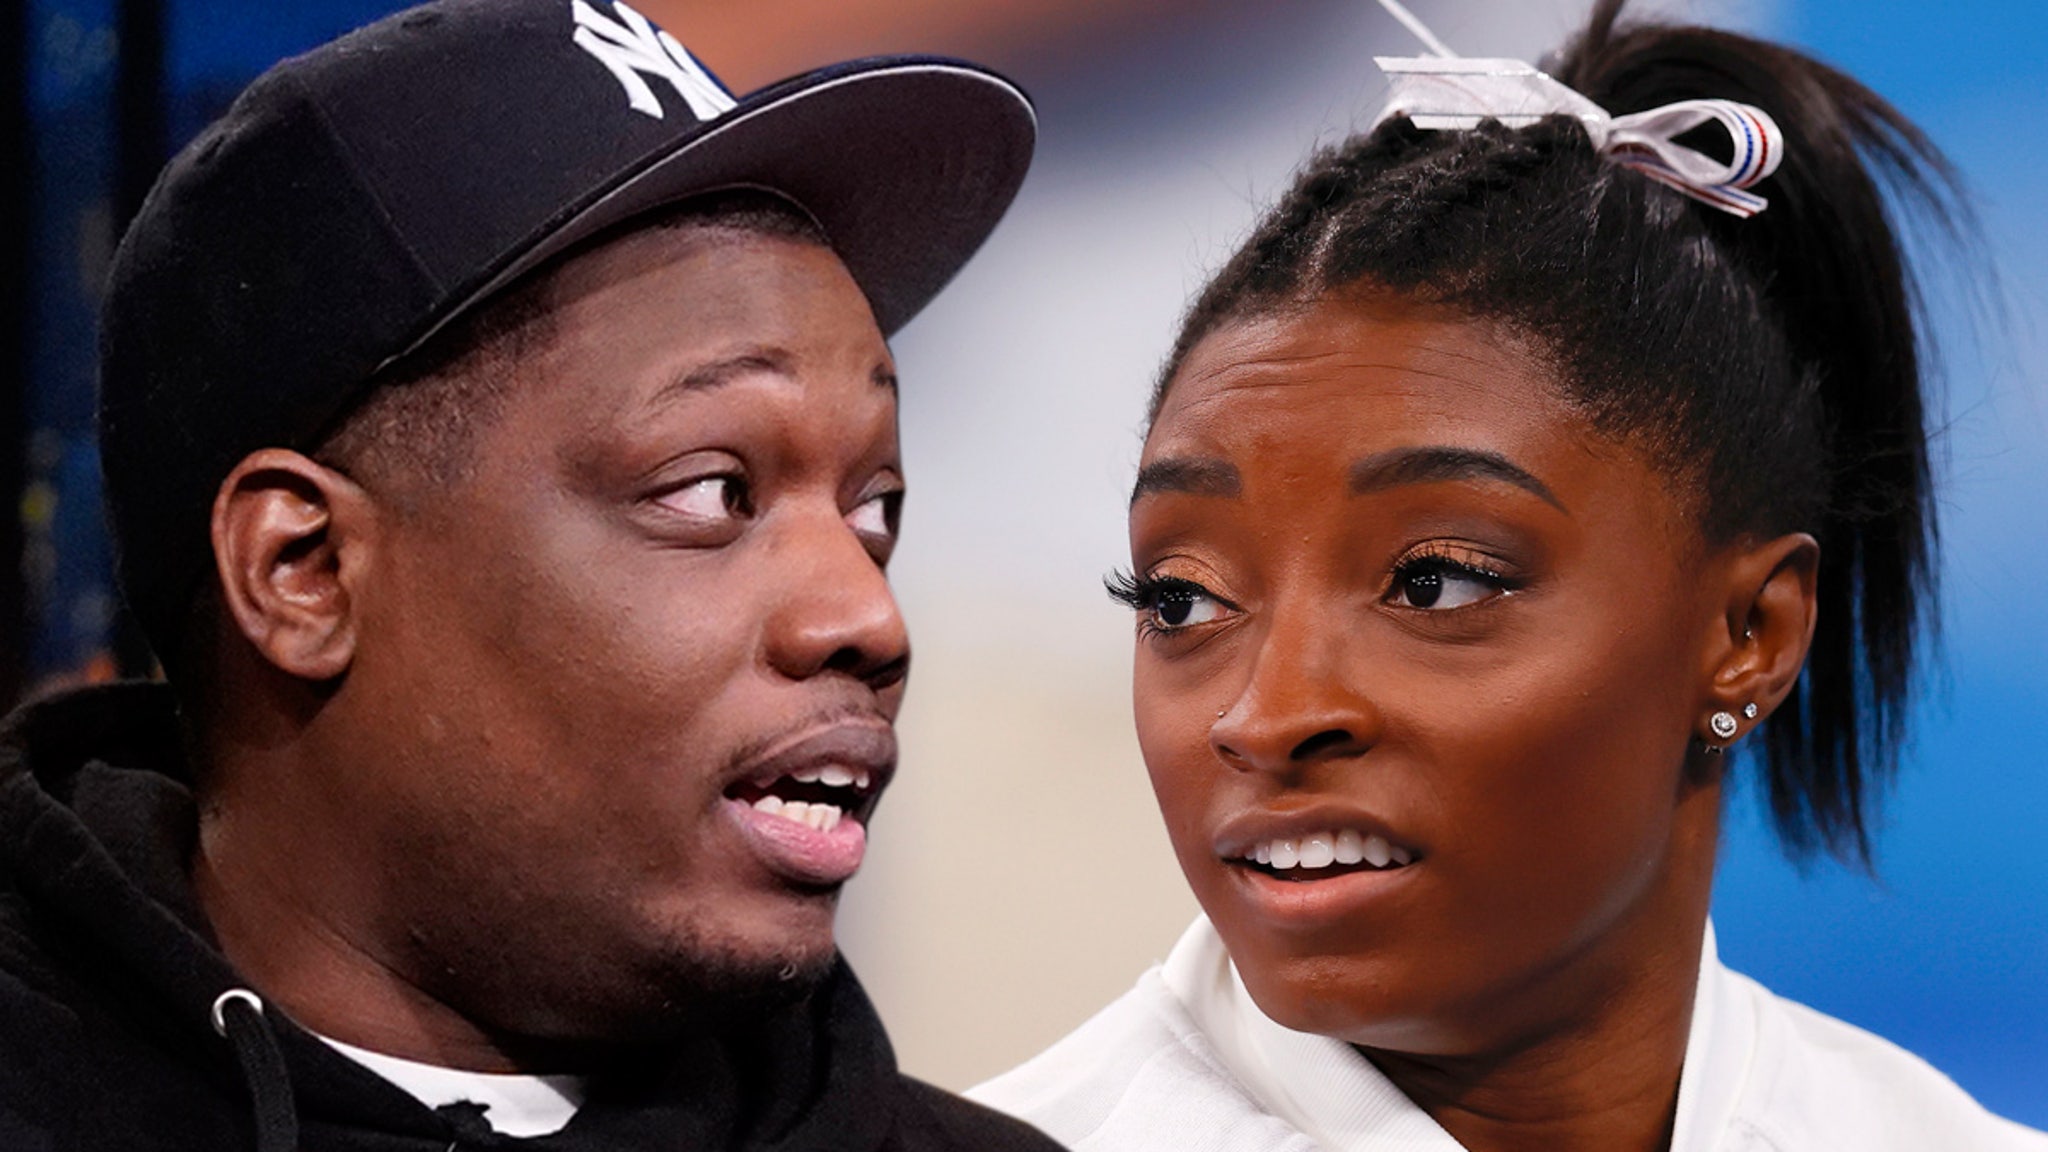 Michael Che Shares Simone Biles Jokes, Gets Immediately Dragged for it